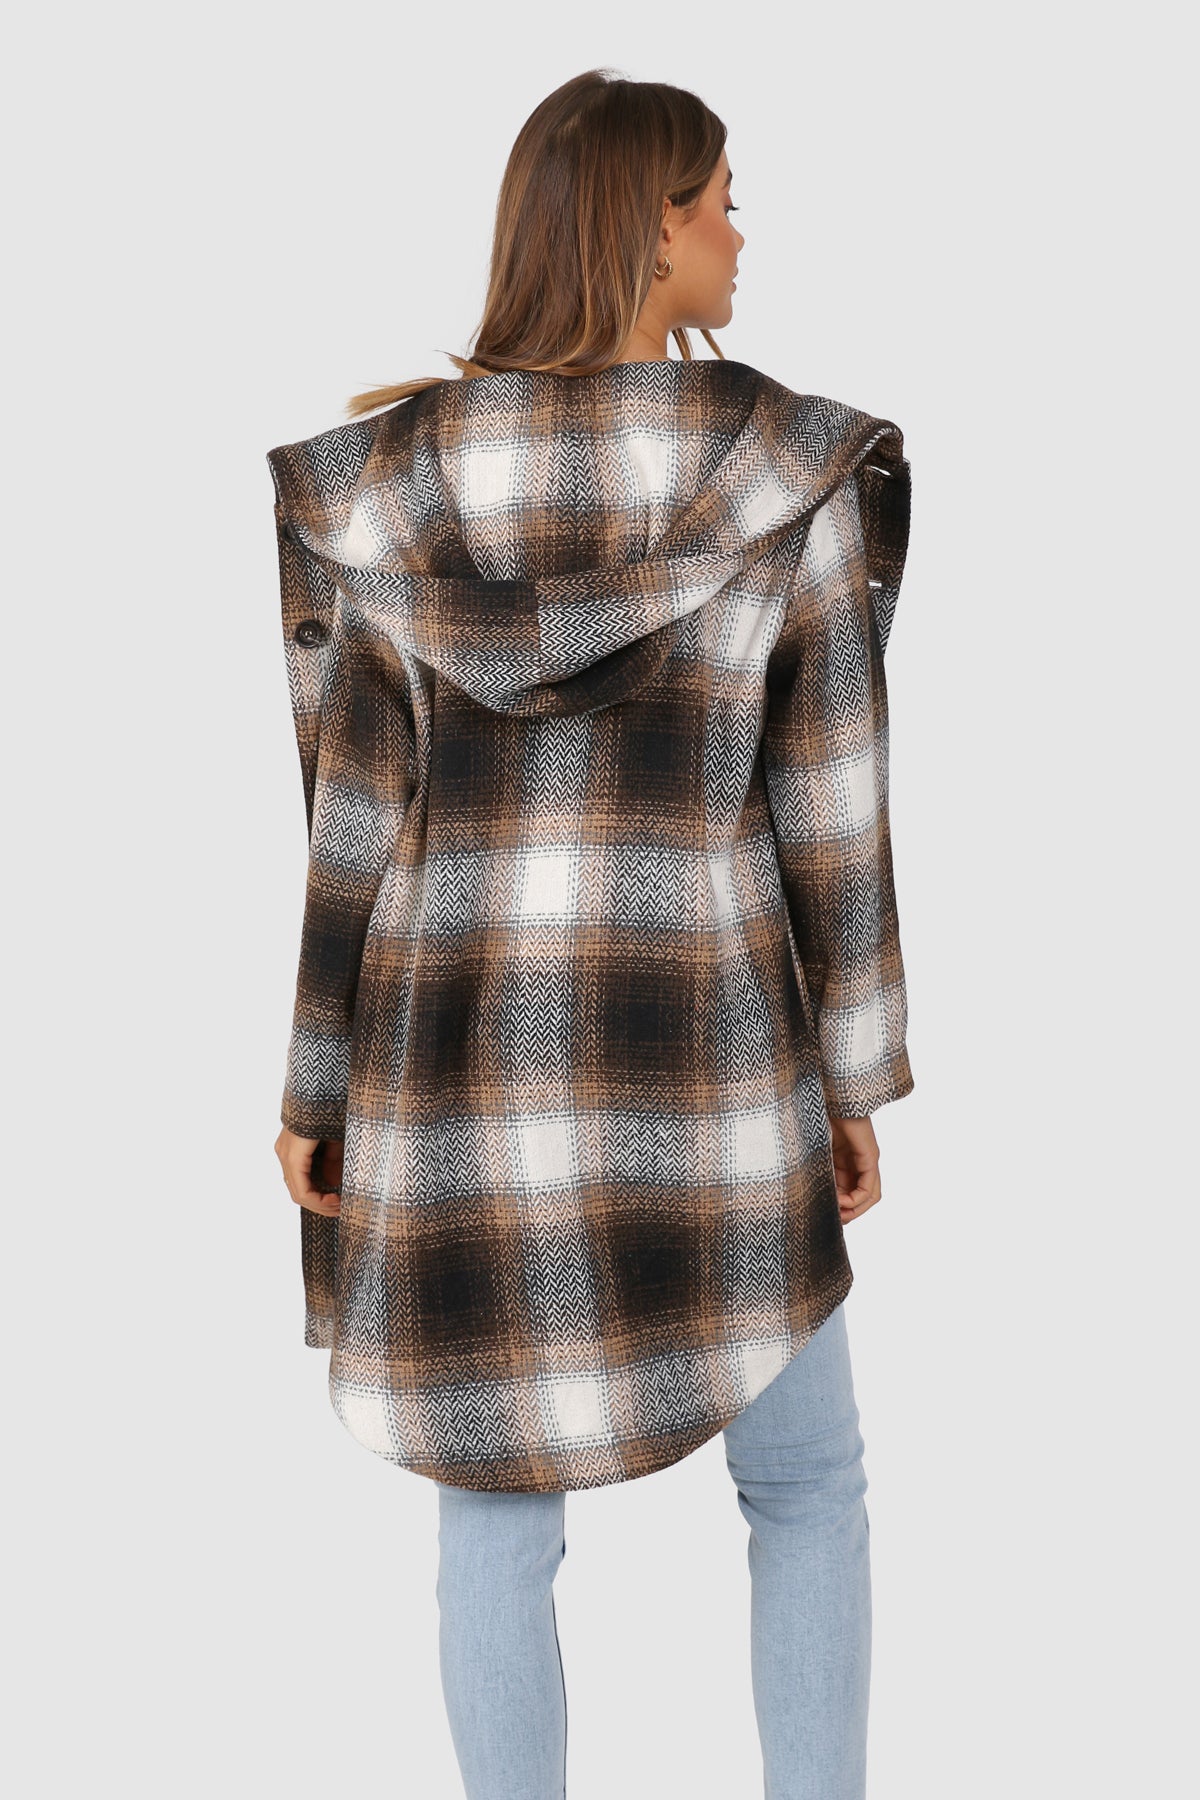 Bailage Haired Caucasian female wearing Plaid Print  Two-oversized front pocket  Relaxed Shoulder  Checkered Lapel Coat  Mid-Length  Buttoned Down  Hooded  Overcoat  Jacket  paired with cotton round neck white tee and high waisted denim jeans